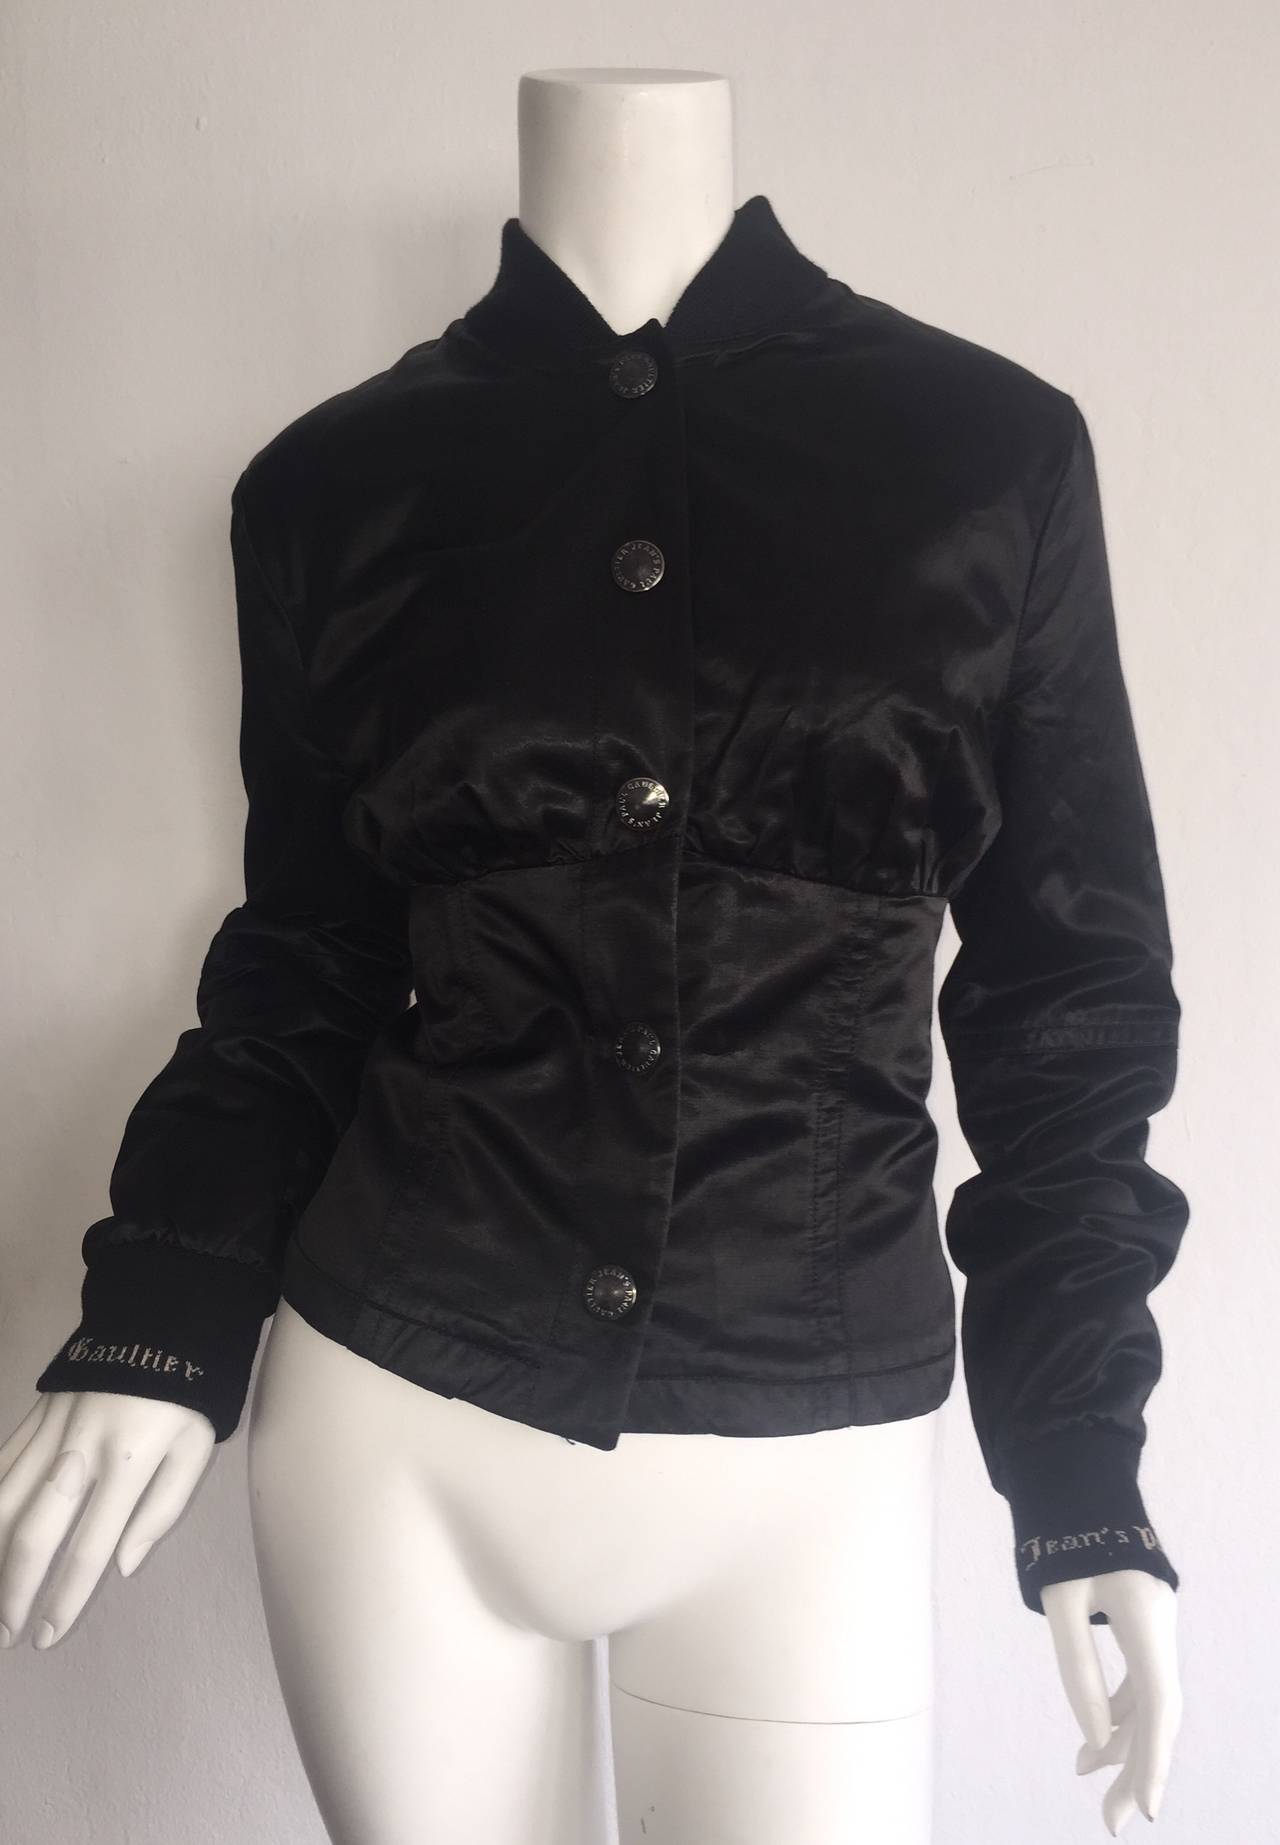 Awesome 1990s vintage Jean Paul Gaultier black bomber jacket! Features lace-up corset back. Signature Gaultier buttons, and tag on back. Gaultier logo at cuffs. Snaps up the front. The perfect everyday jacket! In great condition. Made in Italy.